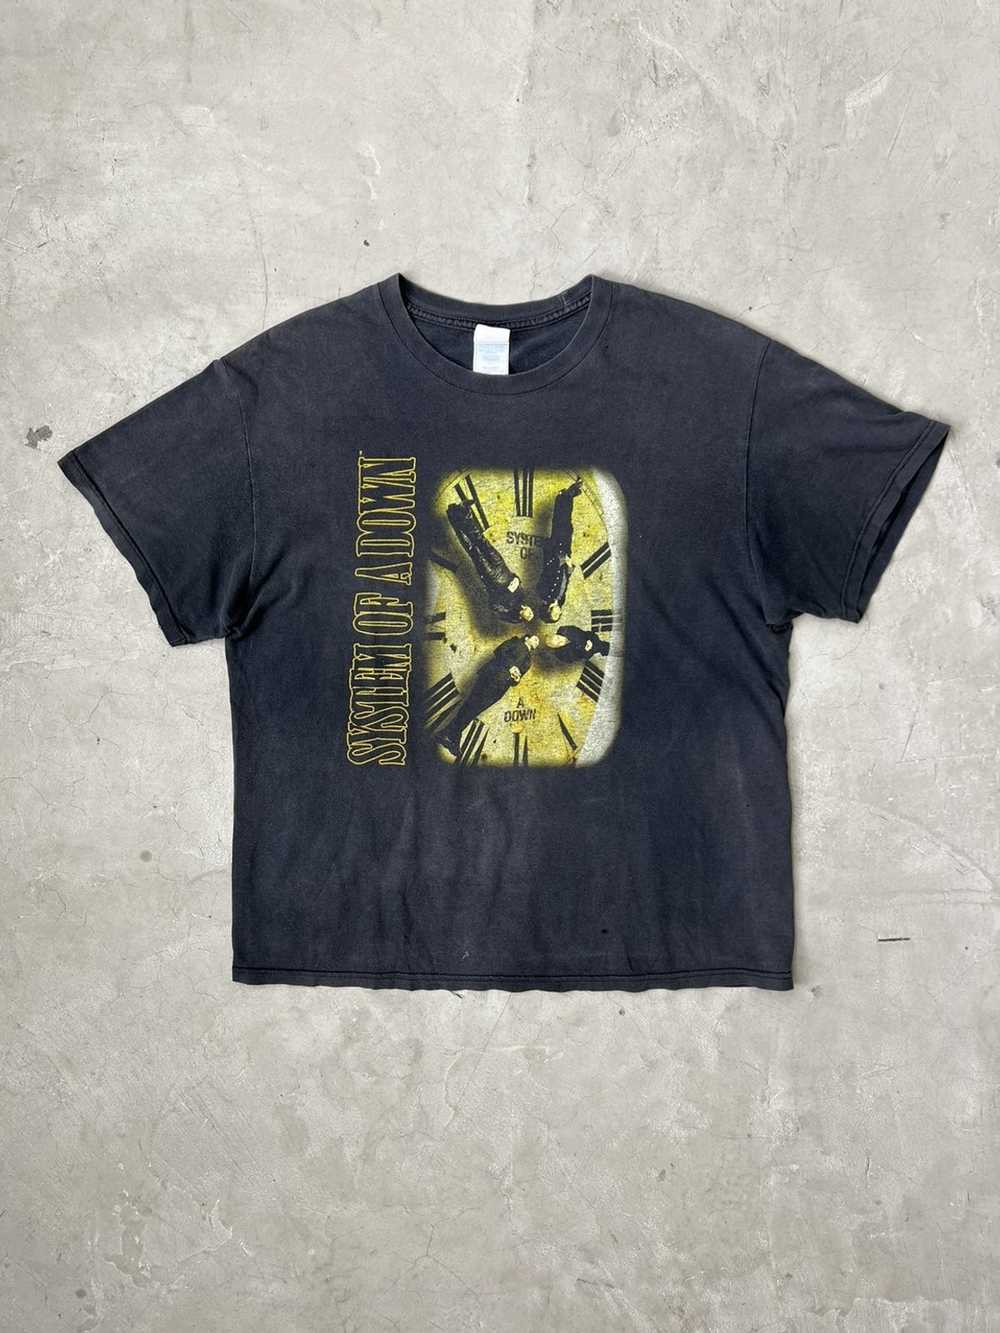 Vintage 90’s System Of A Down Graphic Tee - image 1